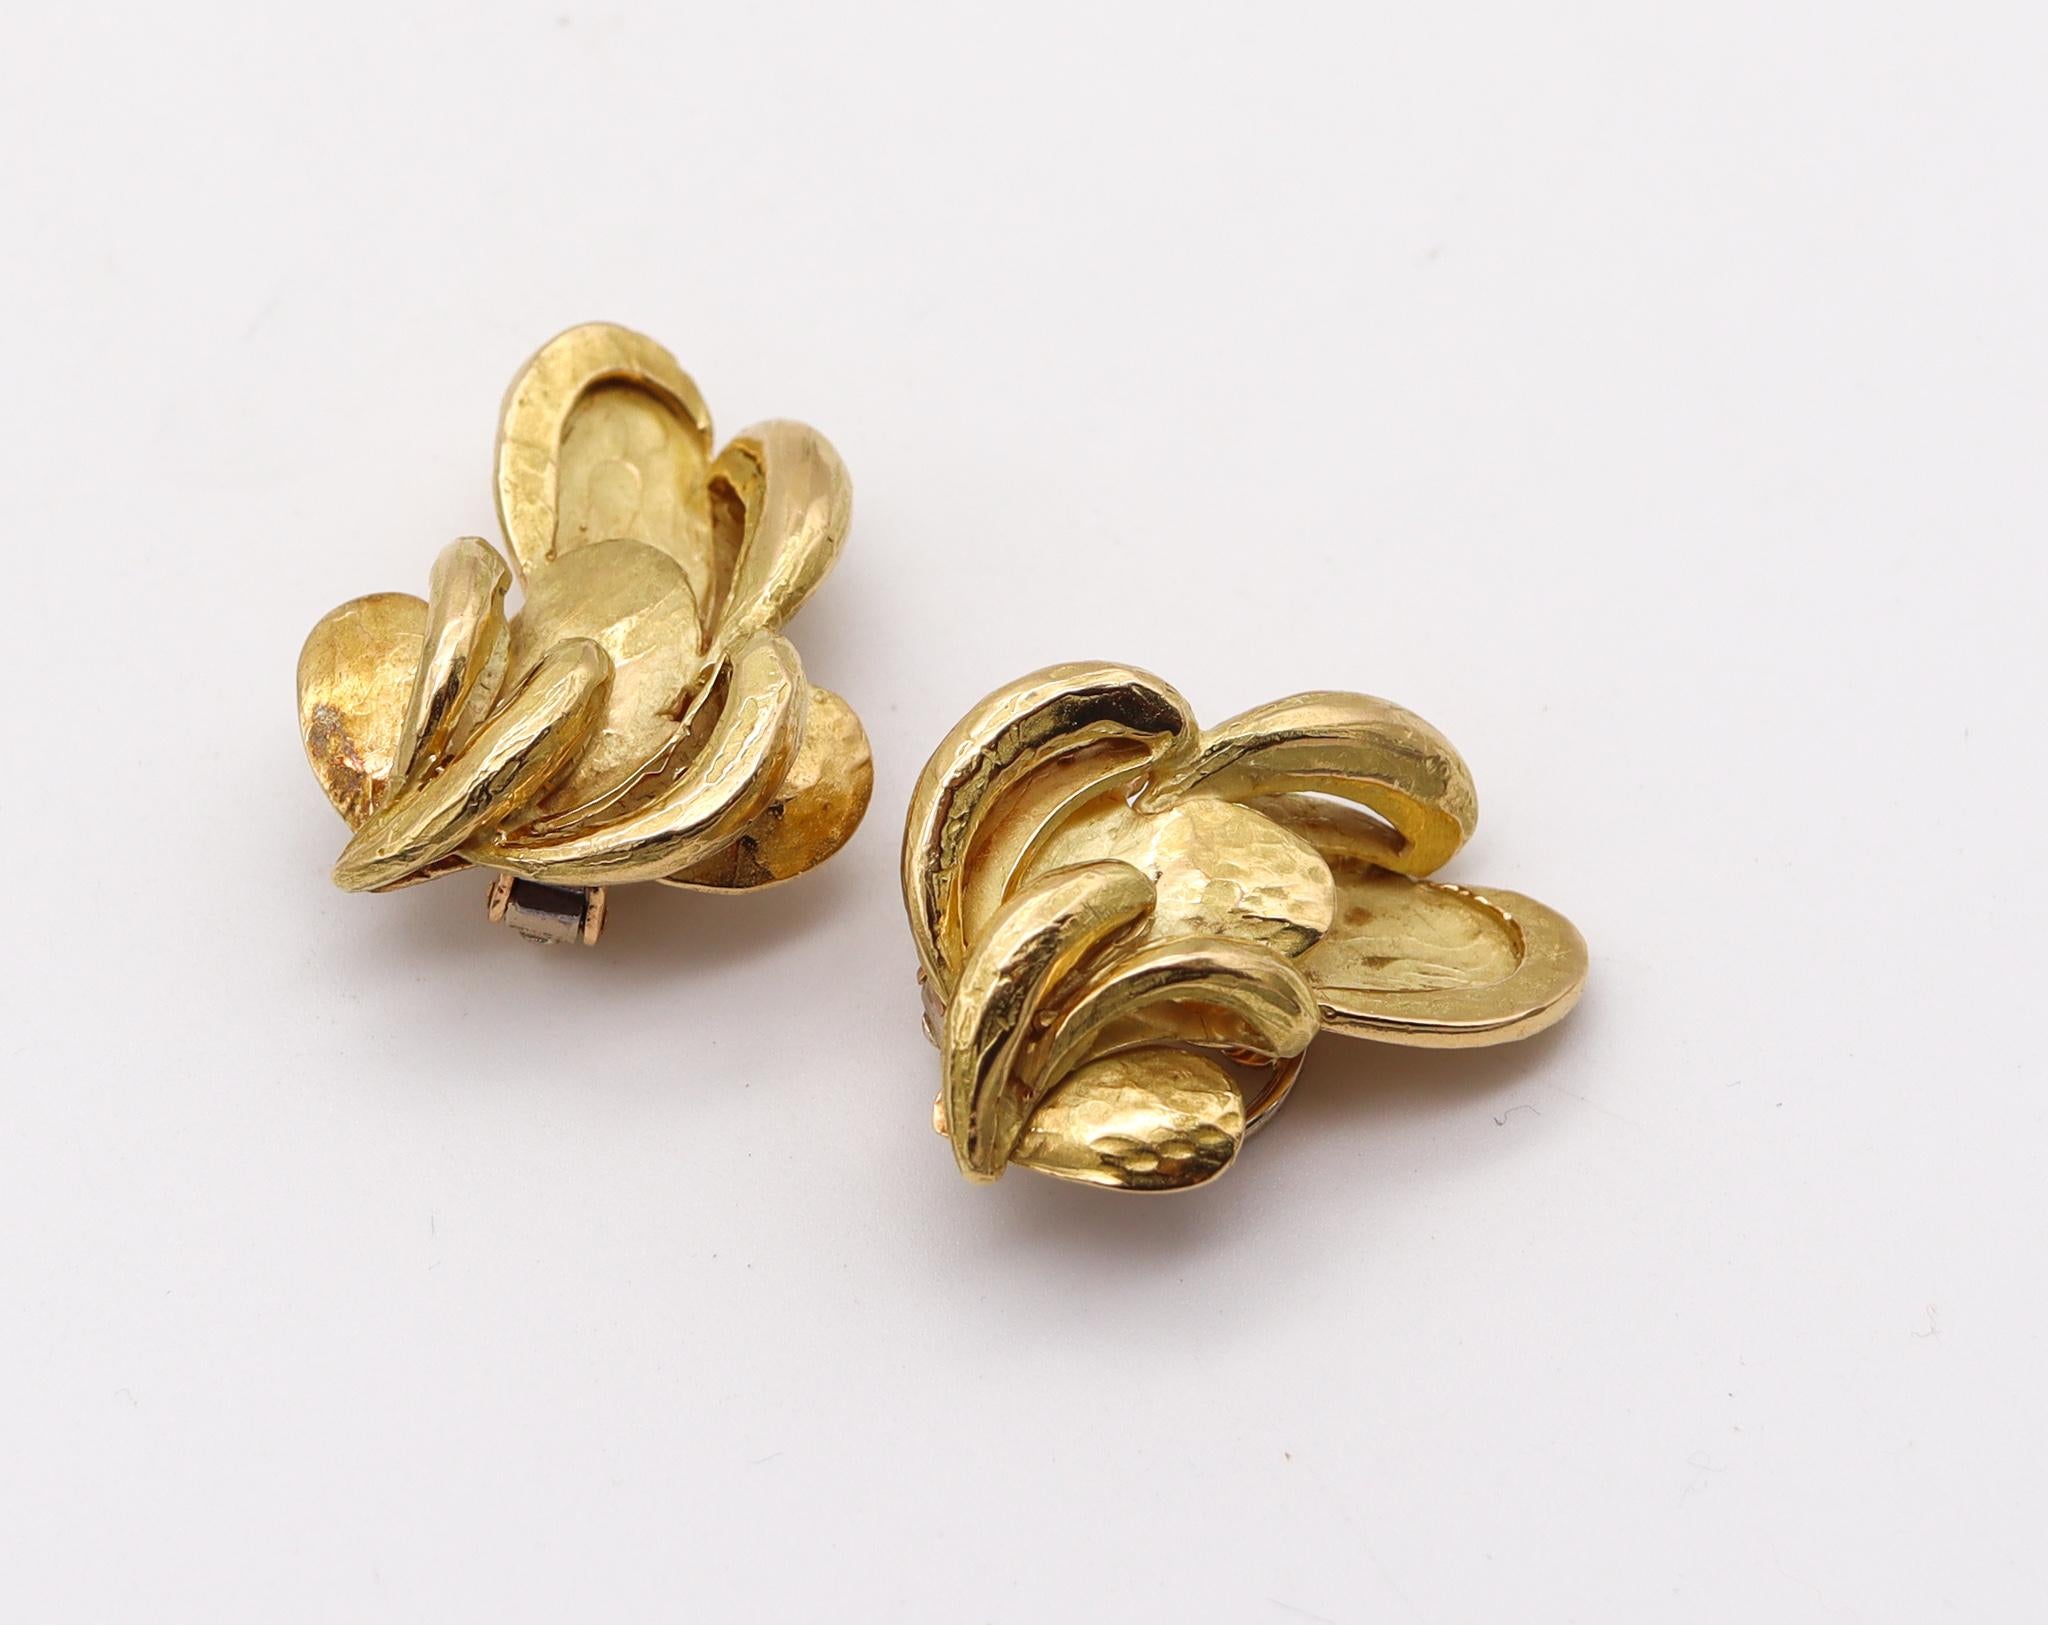 Chaumet Paris 1970 Retro Modernist Clip on Earrings in Solid 18kt Yellow Gold In Excellent Condition For Sale In Miami, FL